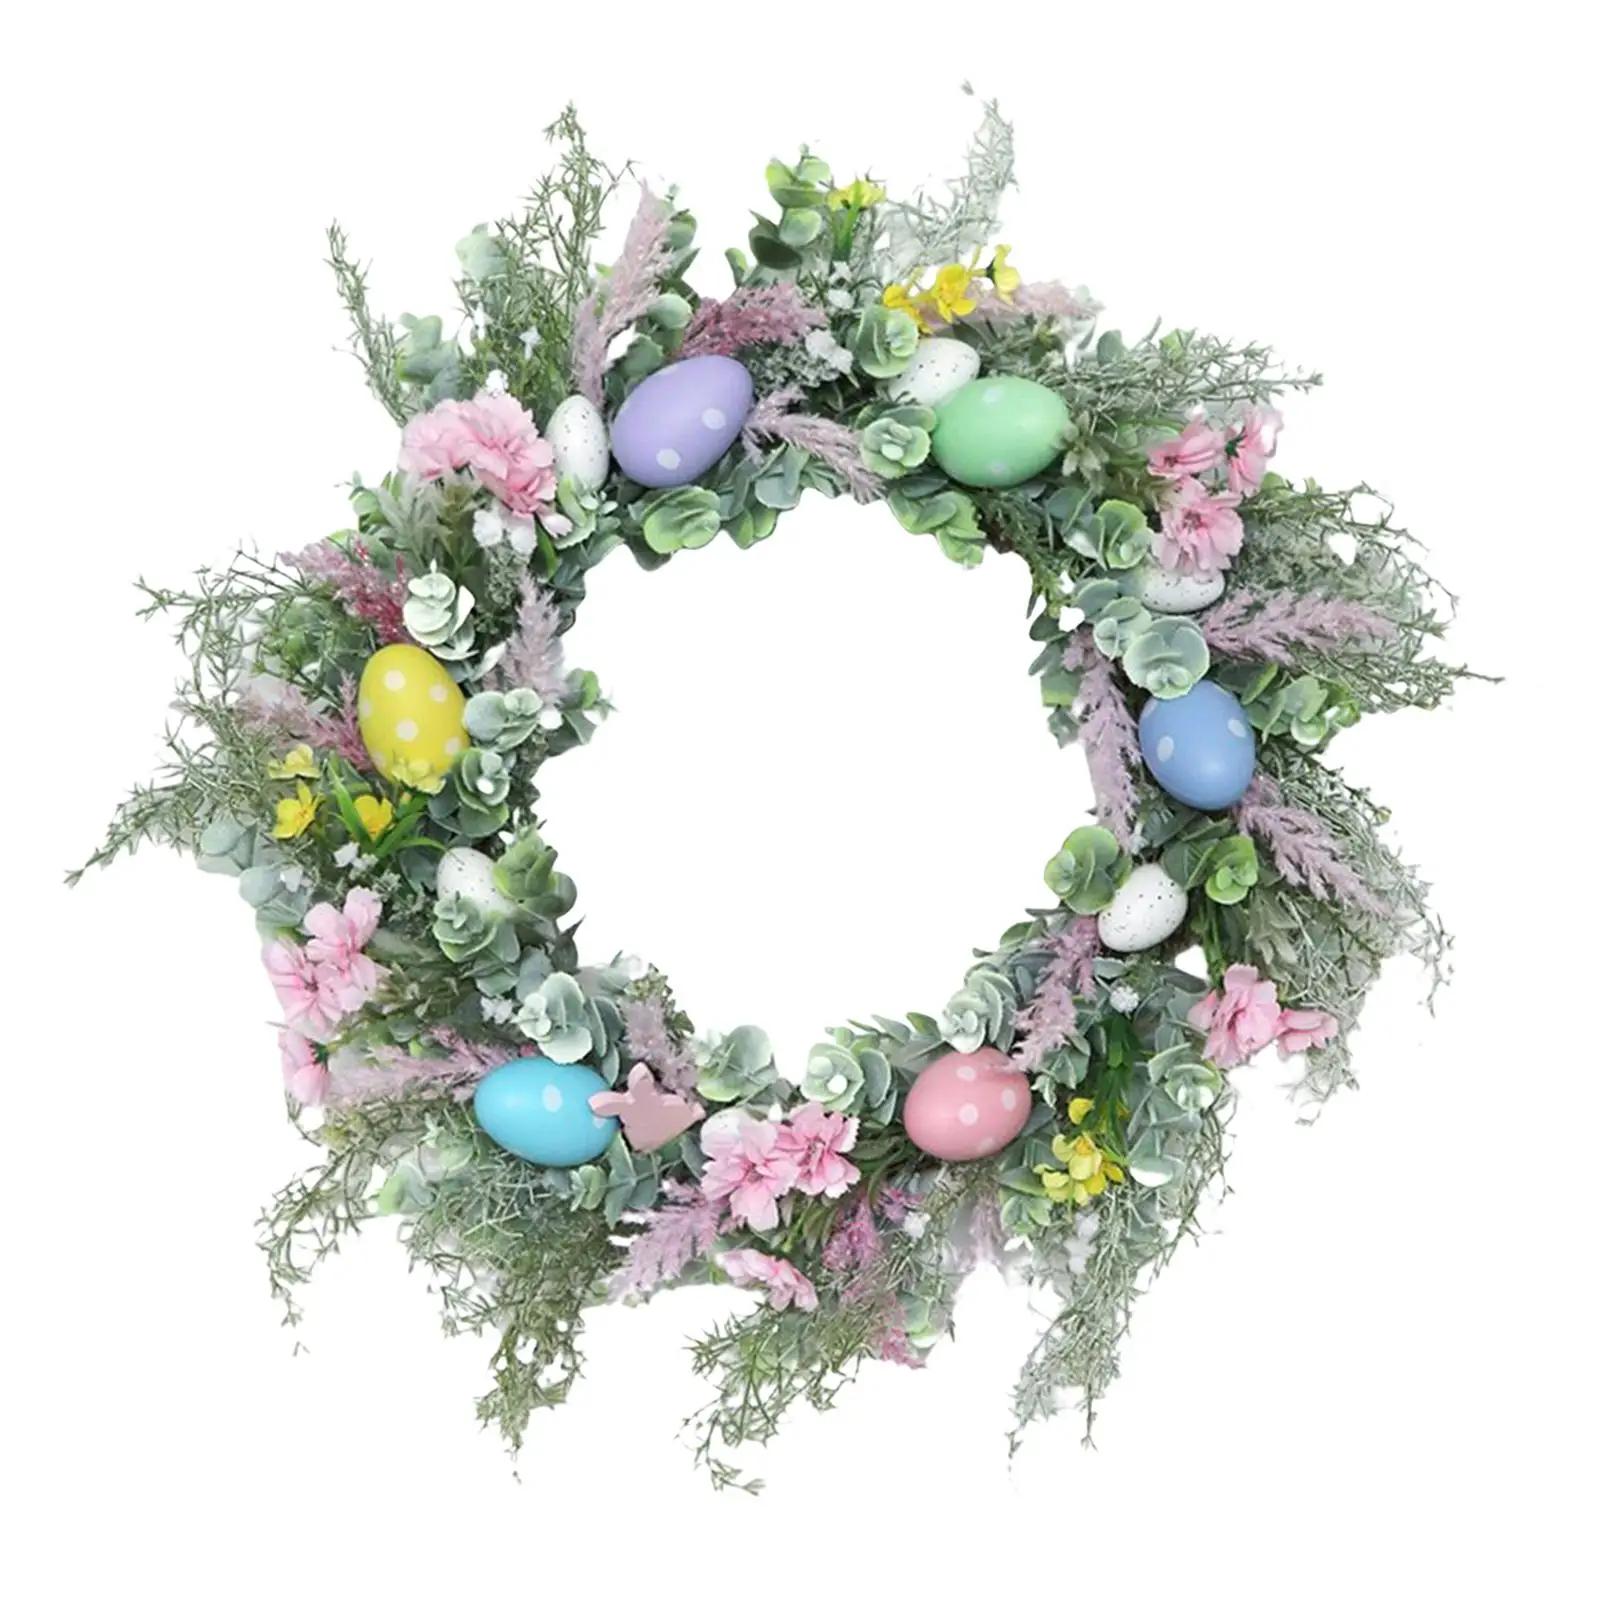 Round Easter Egg Flower Wreath Front Door Spring Window Artificial Green Leaves Garland for Holiday Garden Decoration Ornament